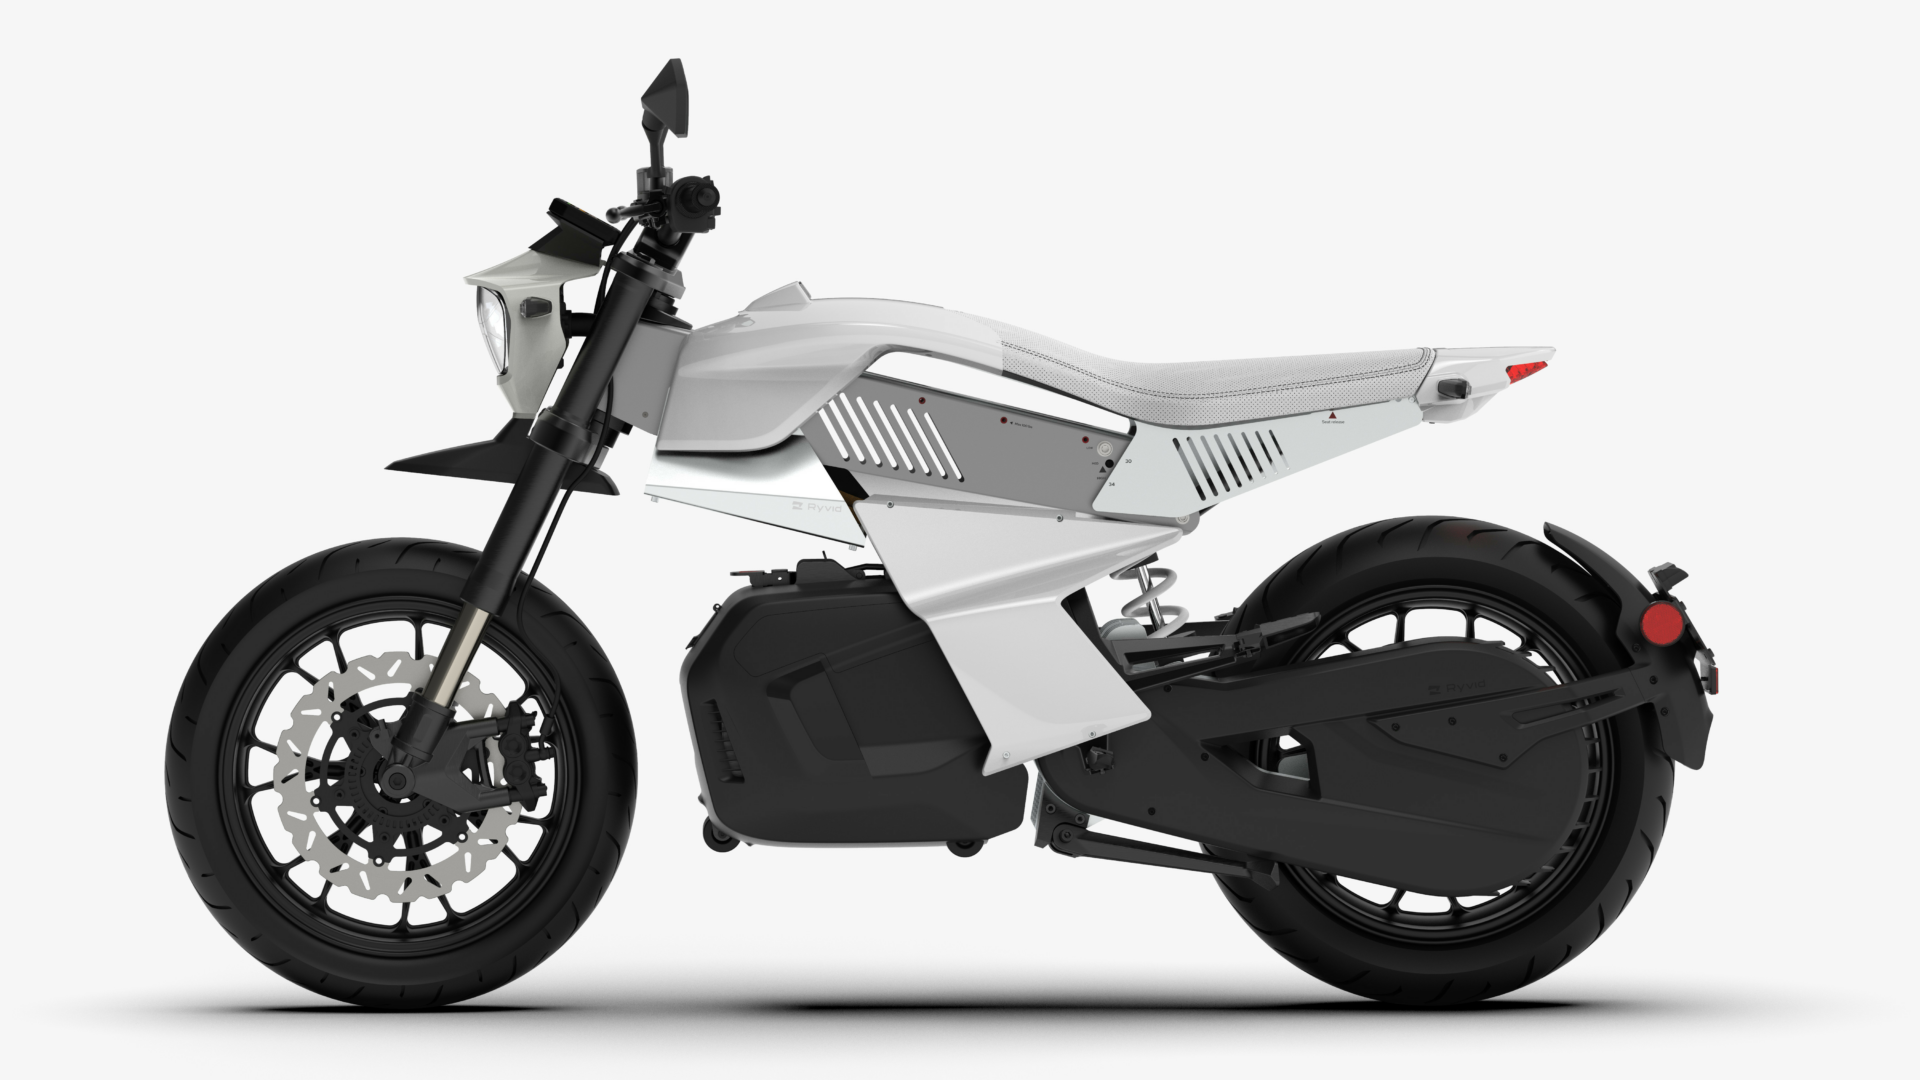 A rendering of an Anthem Launch Edition electric motorcycle. Image courtesy Ryvid.